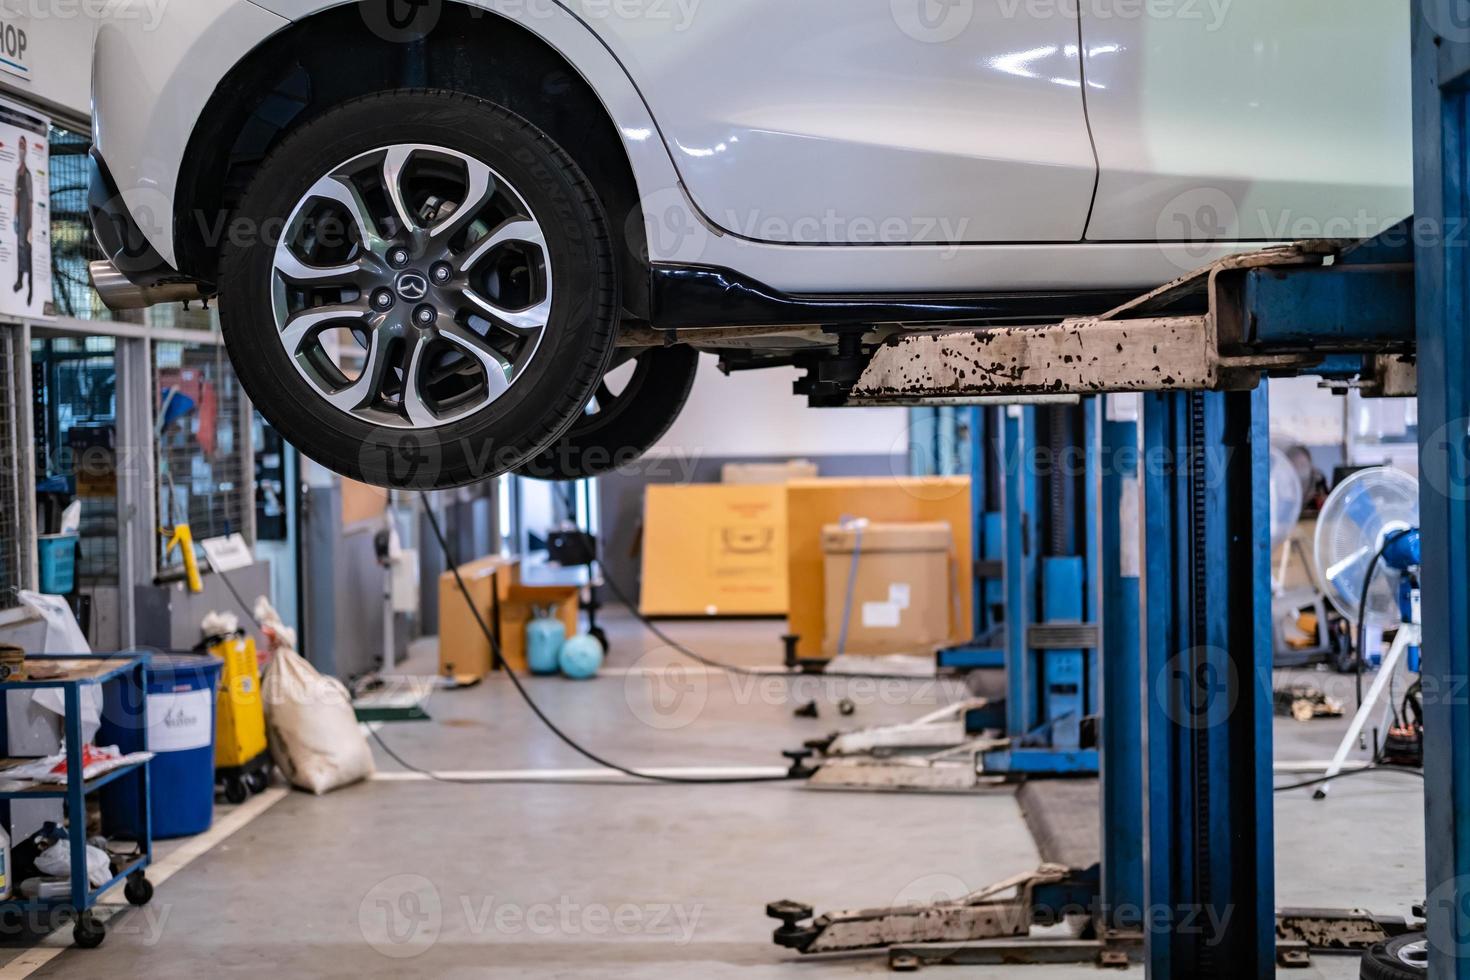 BANGSAEN THAILAND MAR 2022 This car mazda 2 brand japan waiting for repair on car Lift in garage dealership on room customer parked in showroom of thailand for Illustrative editorial image. photo